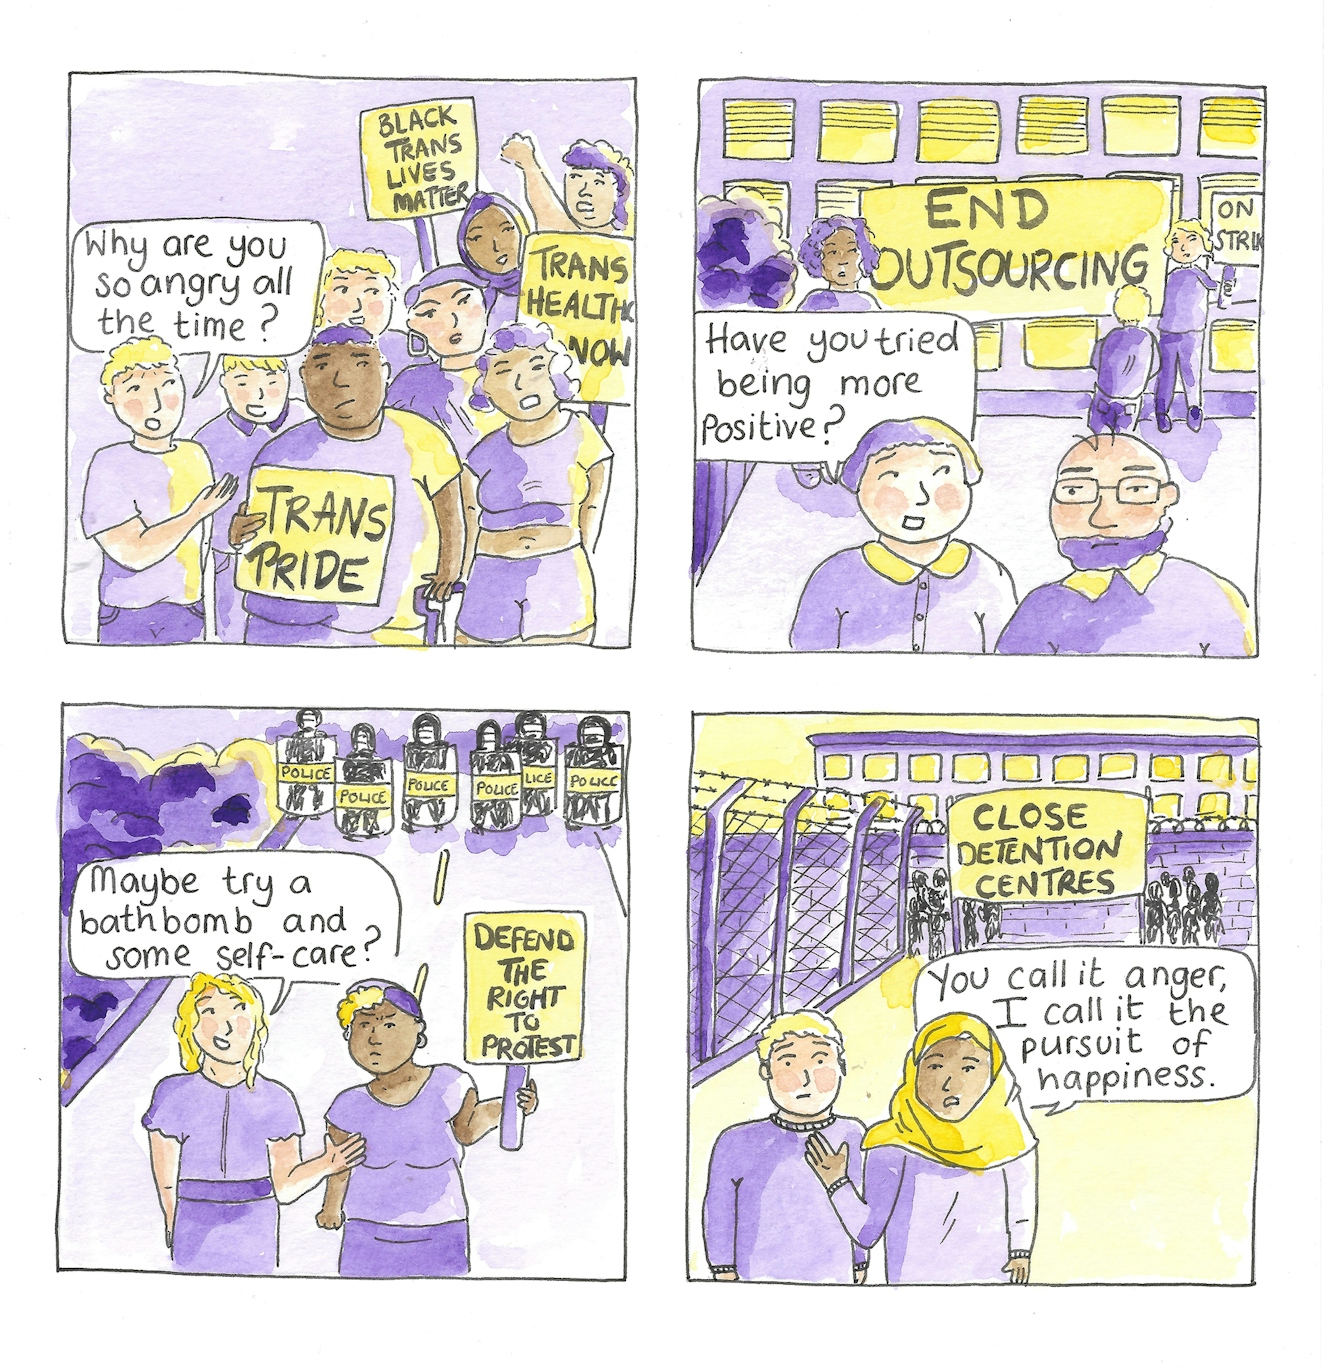 Panel 1 shows a crowd of people with placards reading 'Trans Pride', 'Black Trans Lives Matter', and 'Trans Health Now'. A white person to the side of the crowd speaks to a black central figure asking "Why are you so angry all the time?2

Panel 2 shows a picket line in front of a building with striking workers holding a banner which reads 'End Outsourcing now.' In front of the picket line a white woman asks an elderly man on strike "Have you tried being more positive?"

Panel 3 shows a line of police in riot gear with riot shields. In front of the line of police is a Black woman holding a sign which reads 'Defend the right to protest'. A nearby white woman asks her "Maybe try a bathbomb and some self-care?"

Panel 4 shows a protest in front of a building which is guarded by a barbed wire fence and wall. The protestors hold a banner which reads 'Close detention centres.' In front of the protest a muslim woman in a hijab tells a white man "You call it anger, I call it the pursuit of happiness."